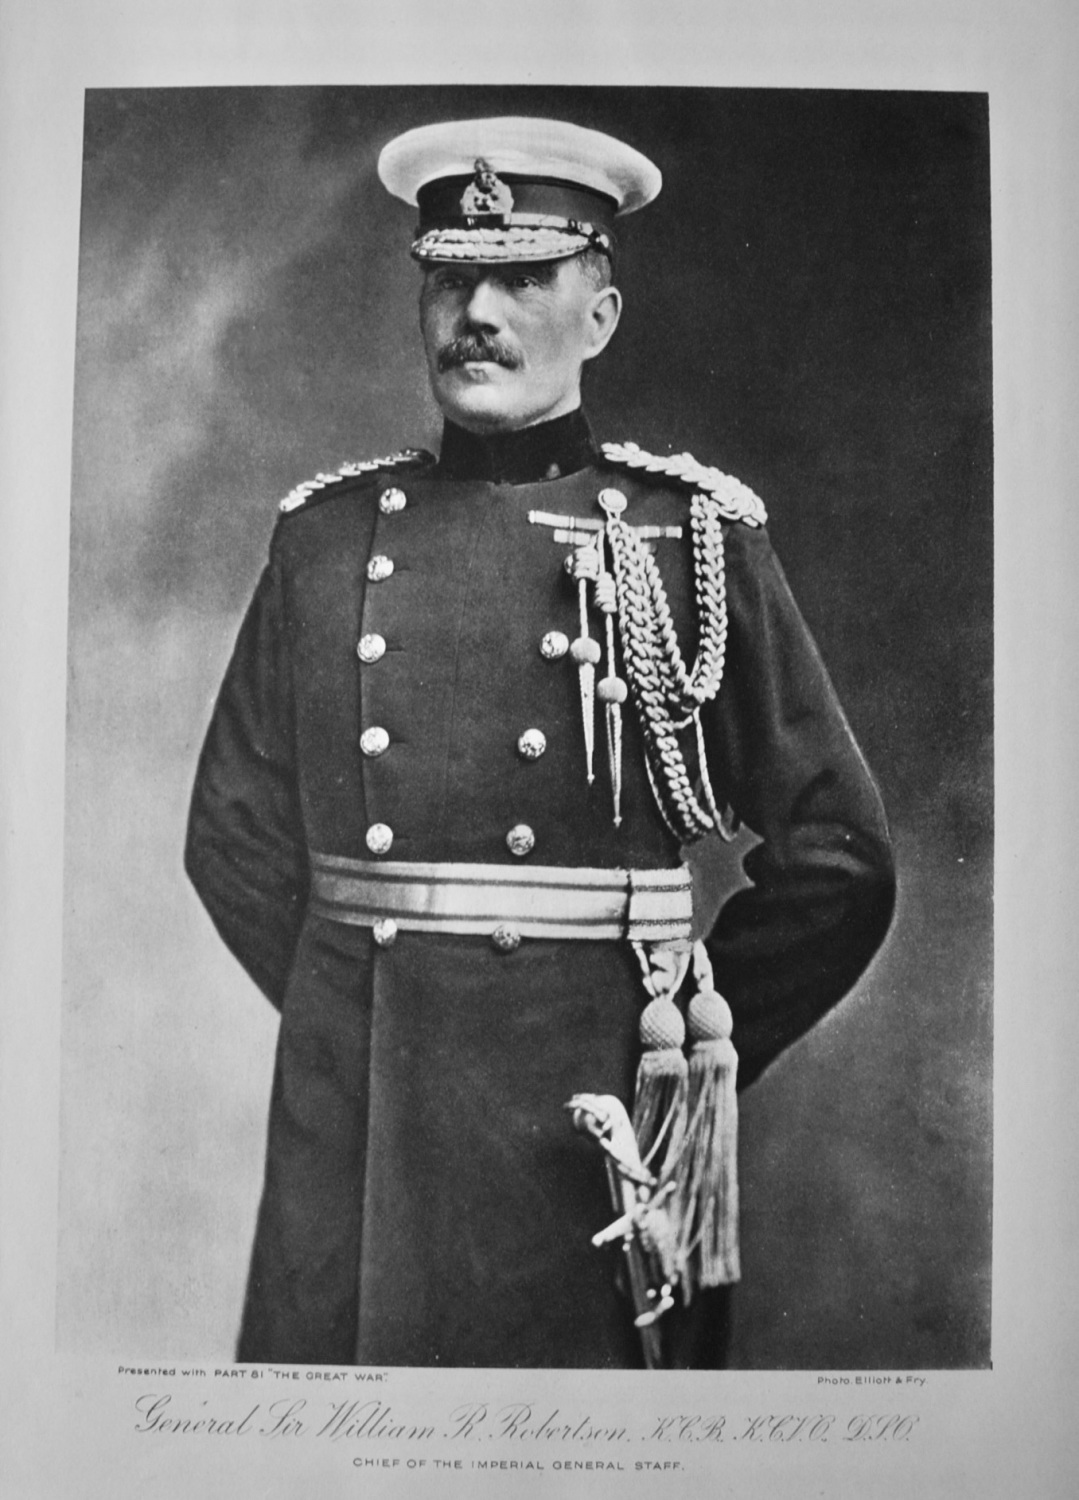 General Sir William R. Robertson.  Chief of the Imperial General Staff.  (1